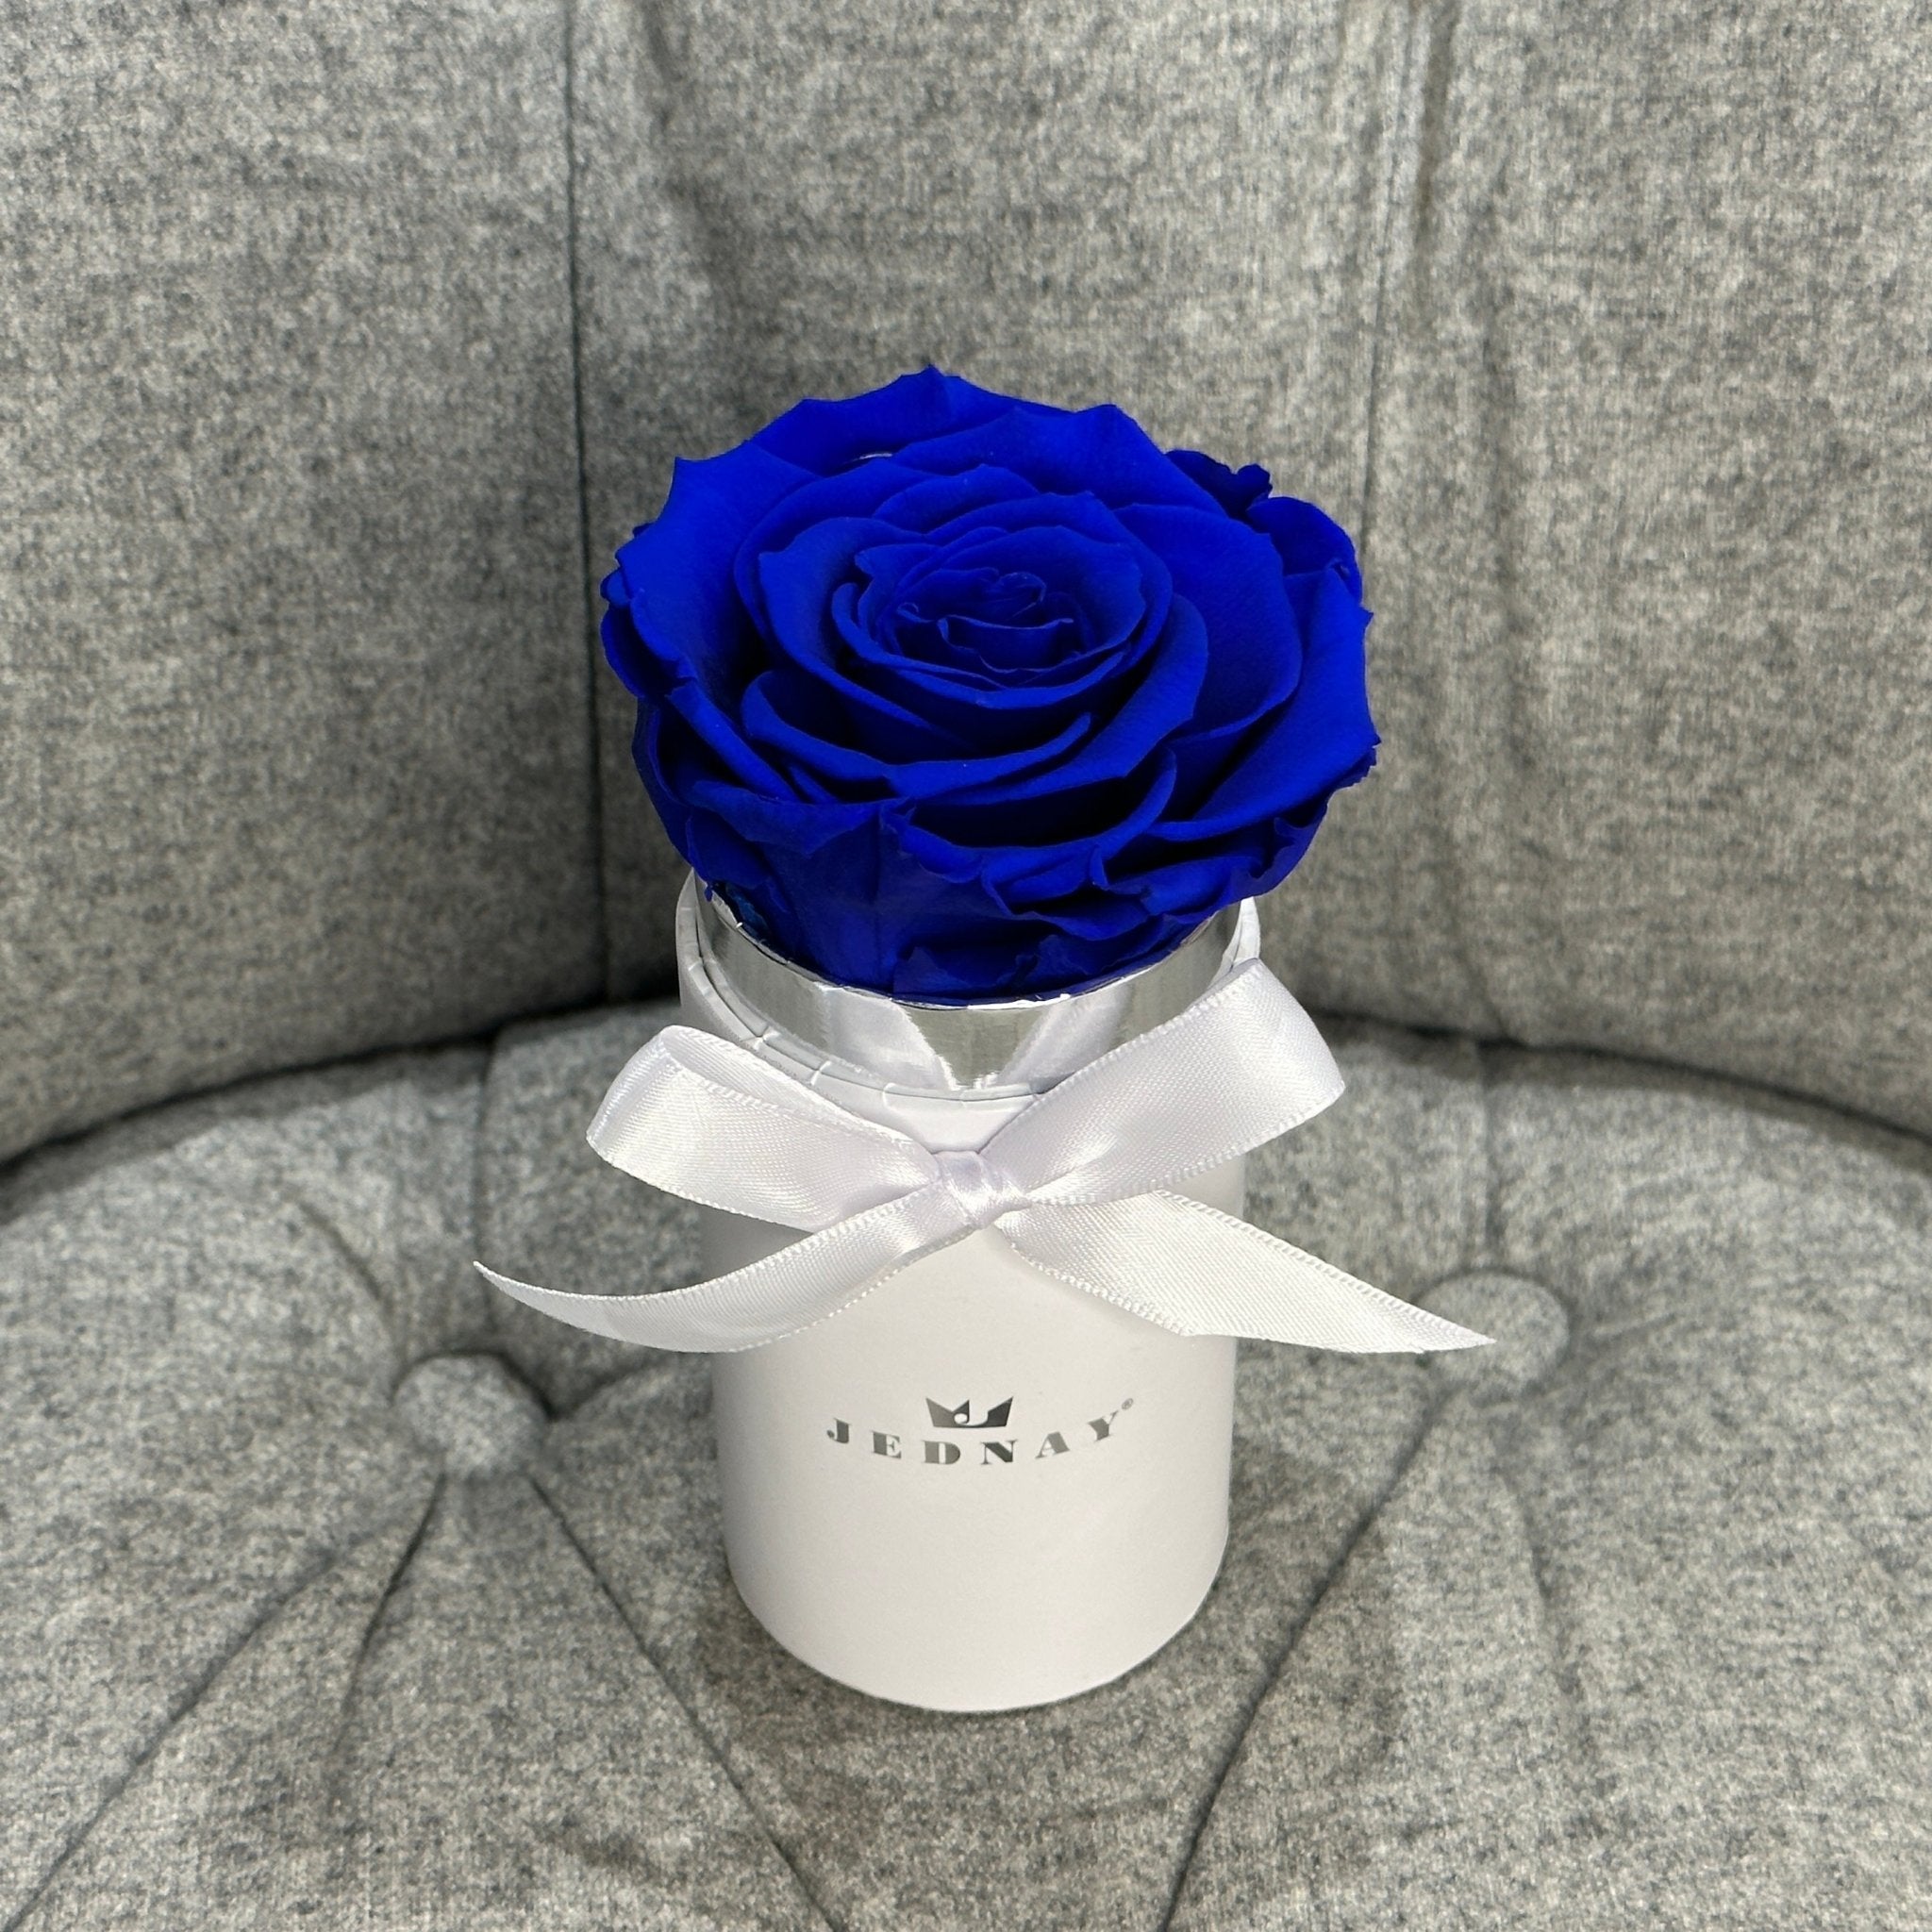 The Uno - Deep Blue Sea Eternal Rose - Classic White Box - Jednay Roses